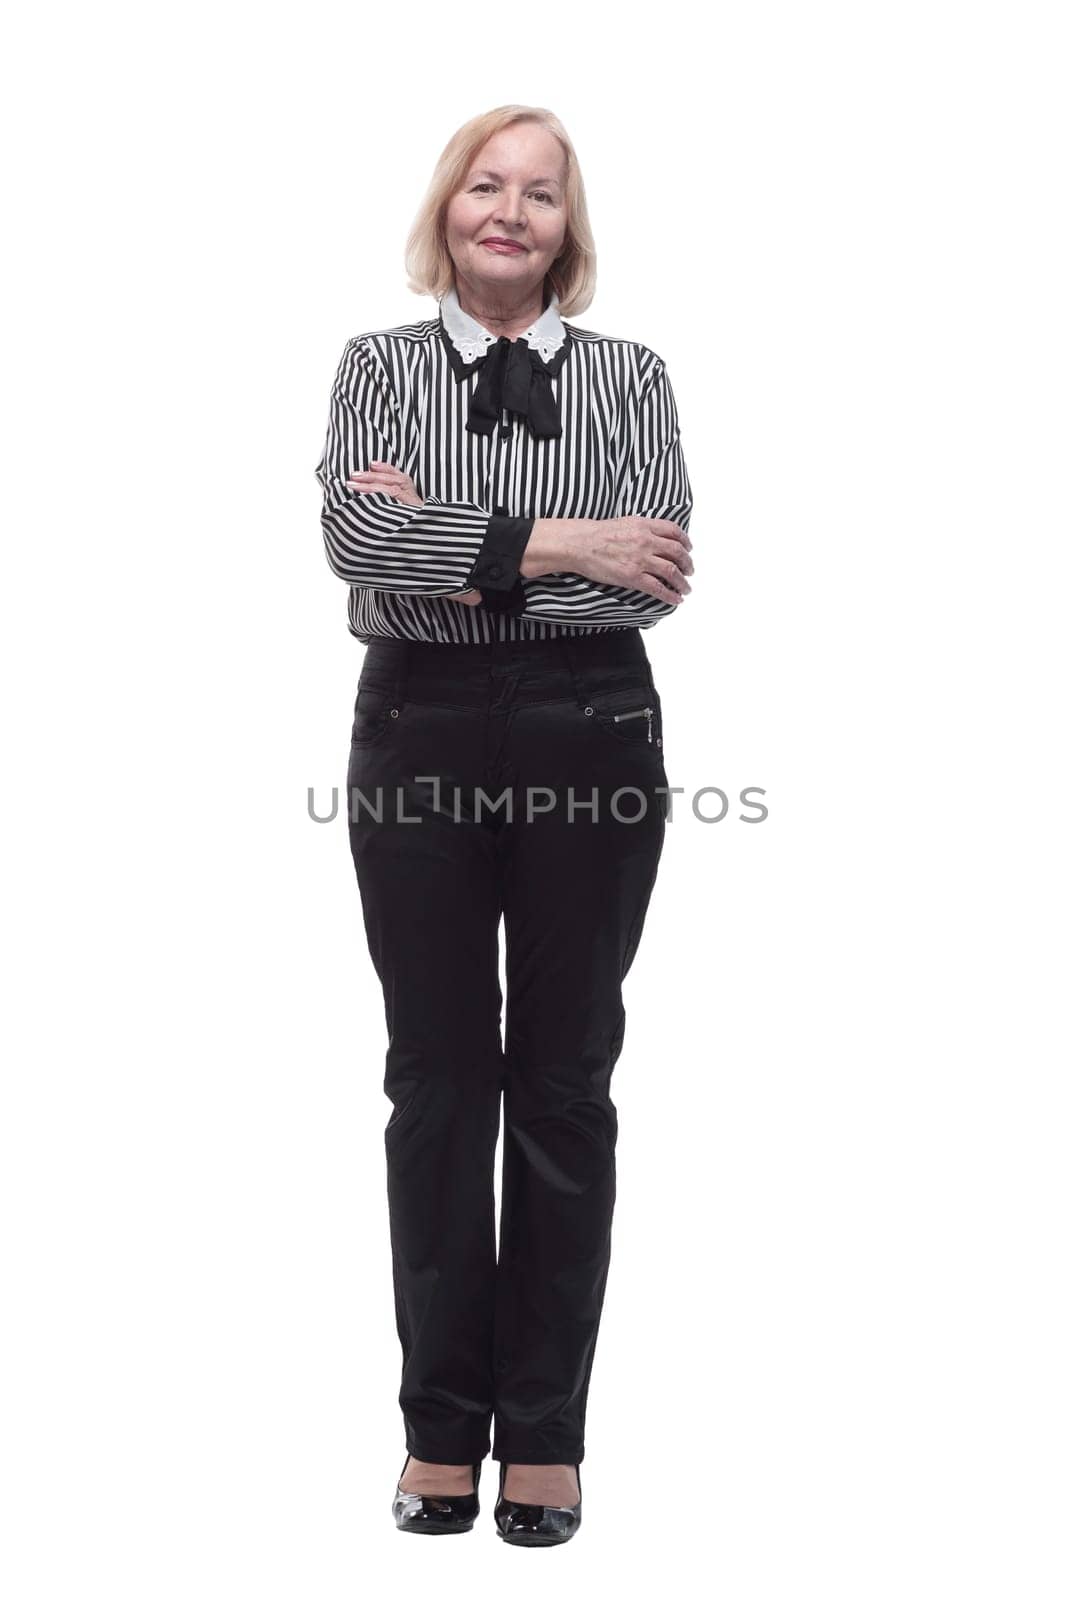 in full growth. Executive business woman. isolated on a white background.